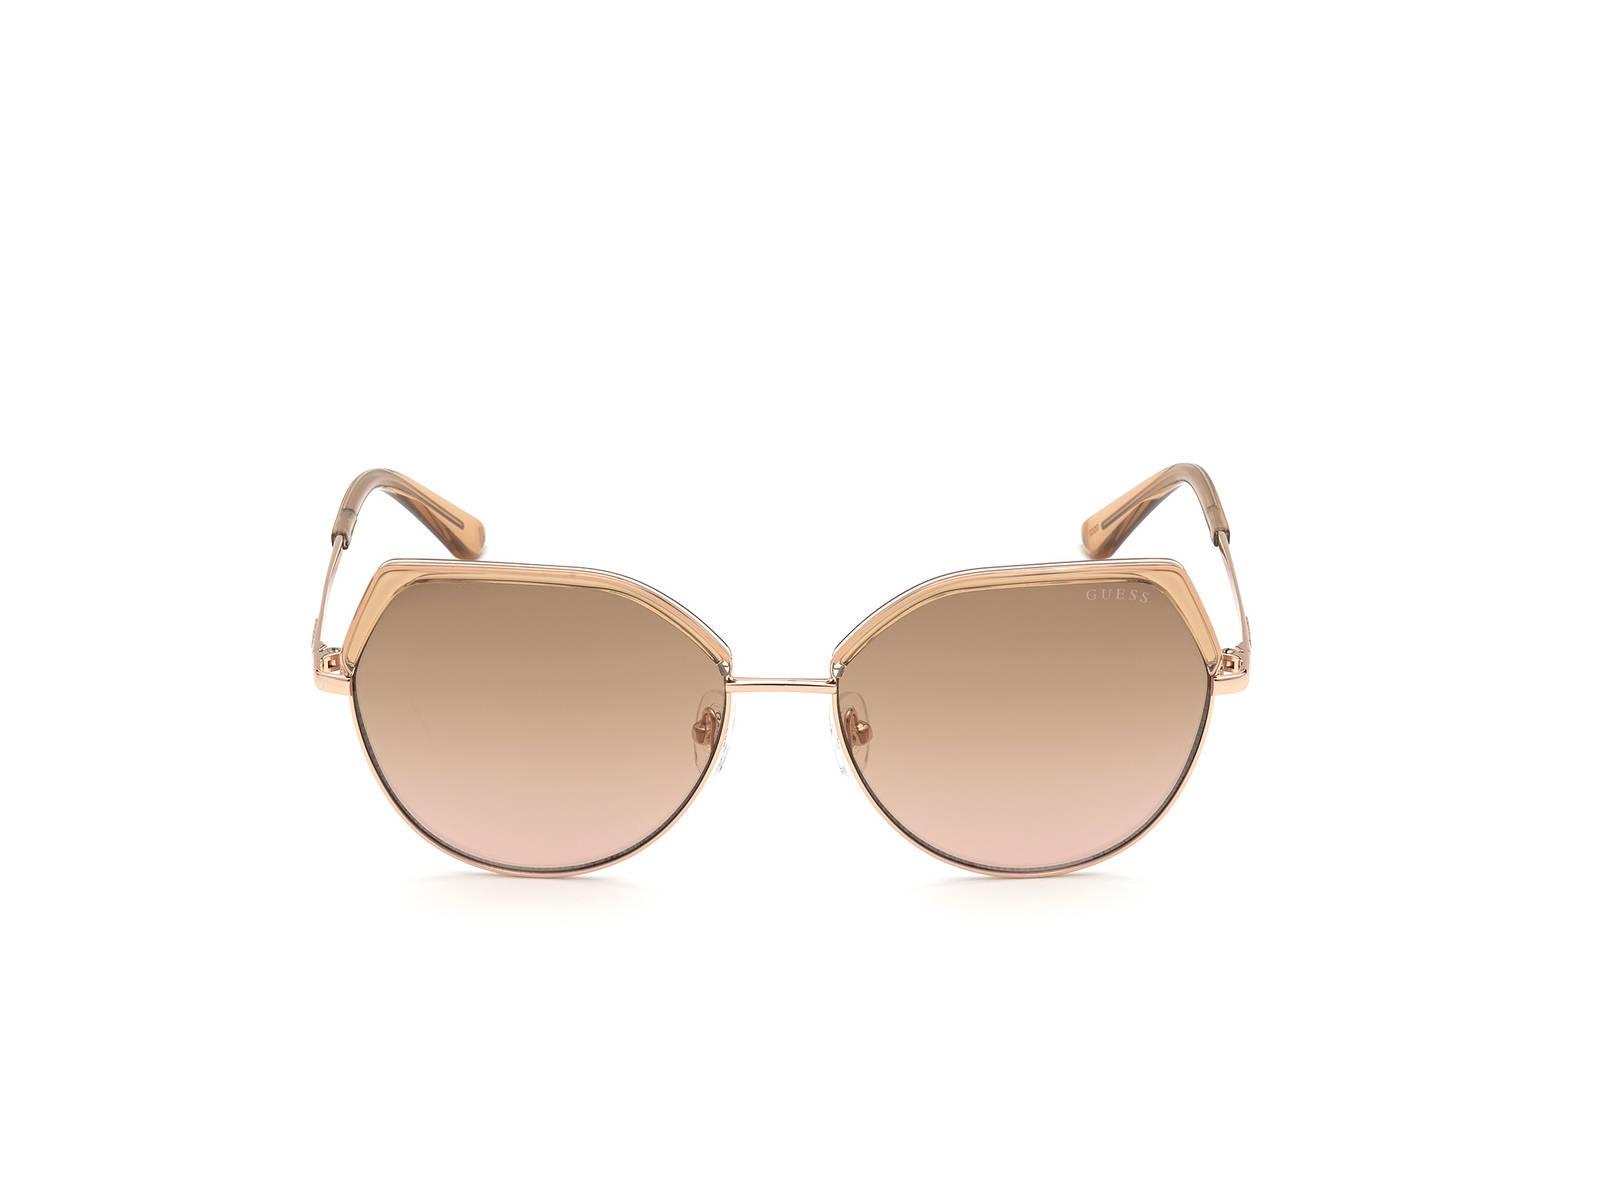 Fashionable Pair of Guess Beige Sunglasses Wallpaper